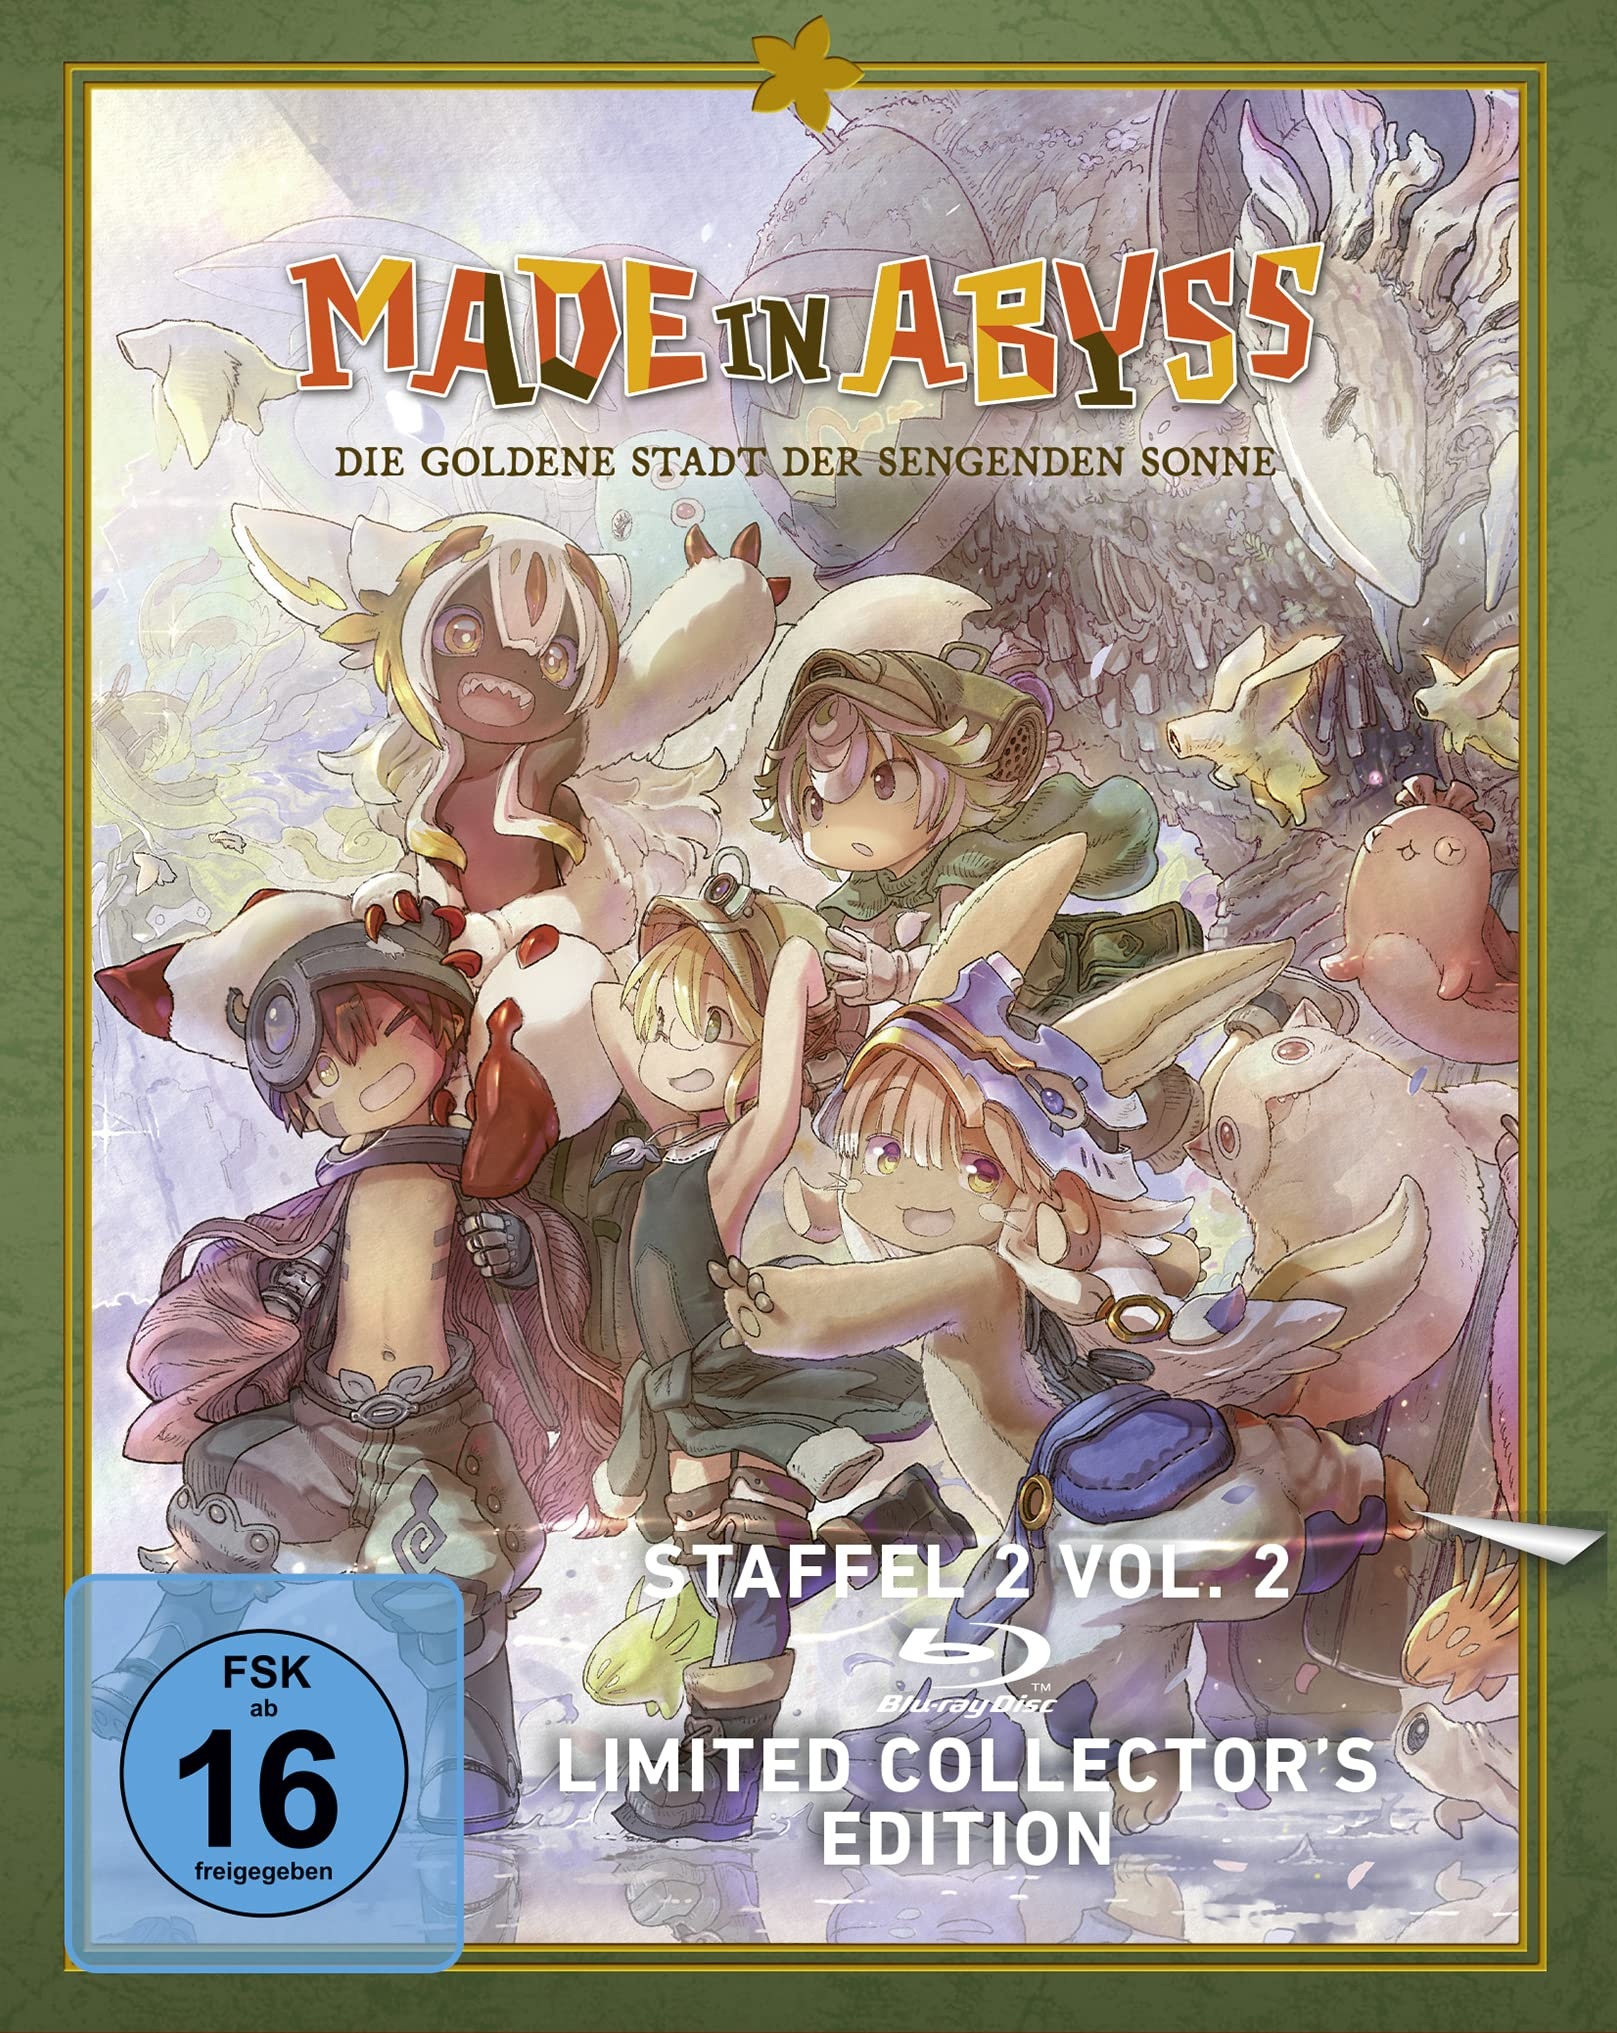 Made in Abyss - Staffel 2.Vol.2 - Limited Collector's Edition [Blu-ray]